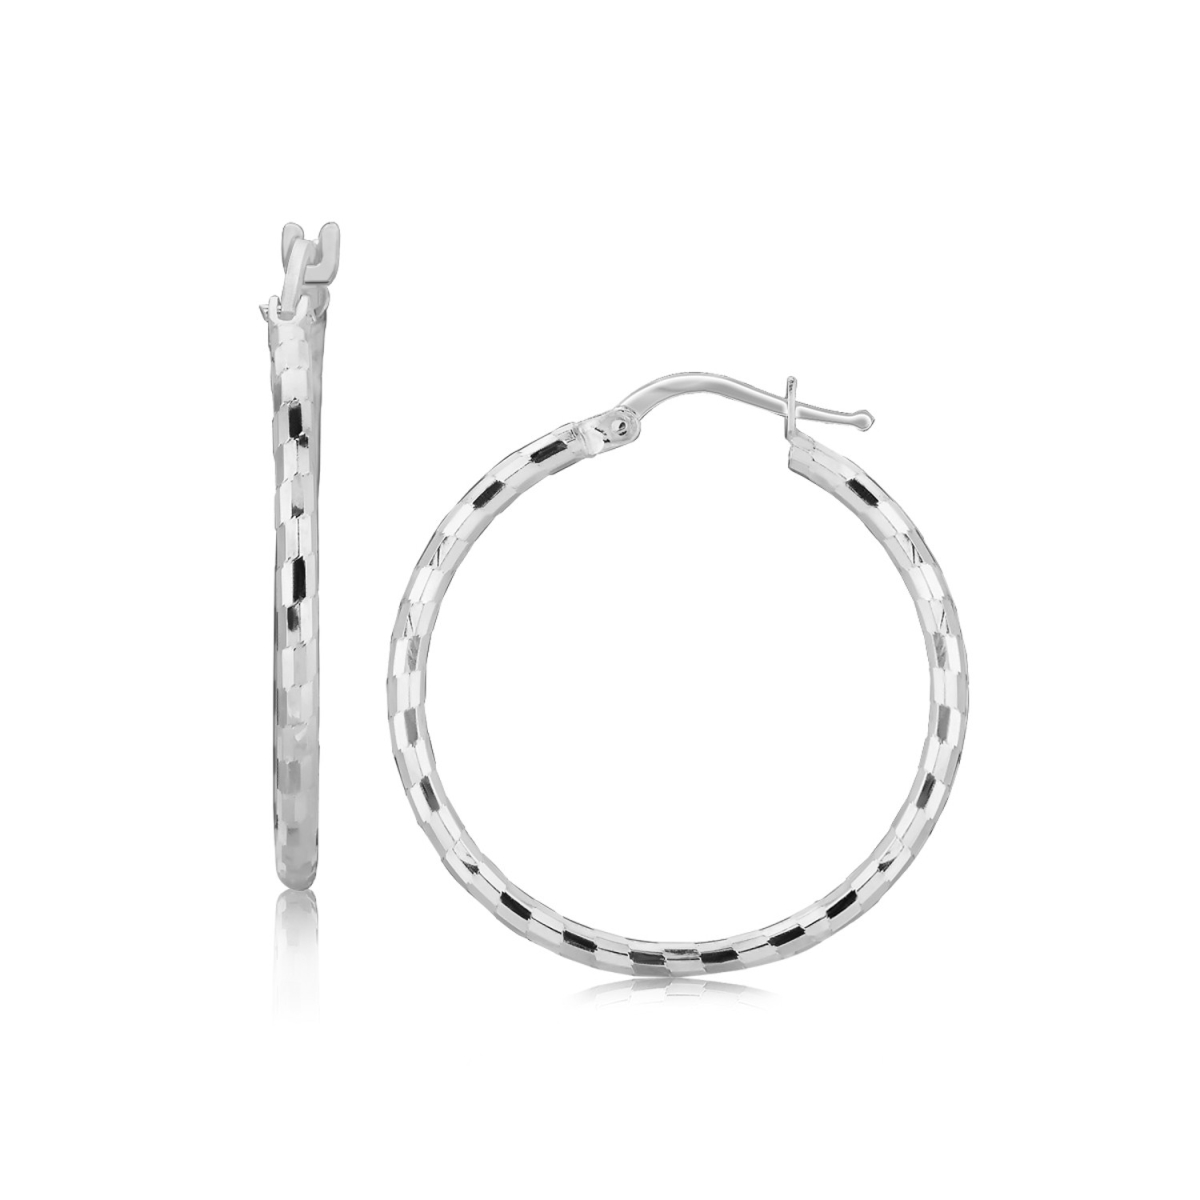 Picture of Iconic Jewels D178657 Sterling Silver Hoop Design Diamond Cut Earrings with Rhodium Plating - 26 mm